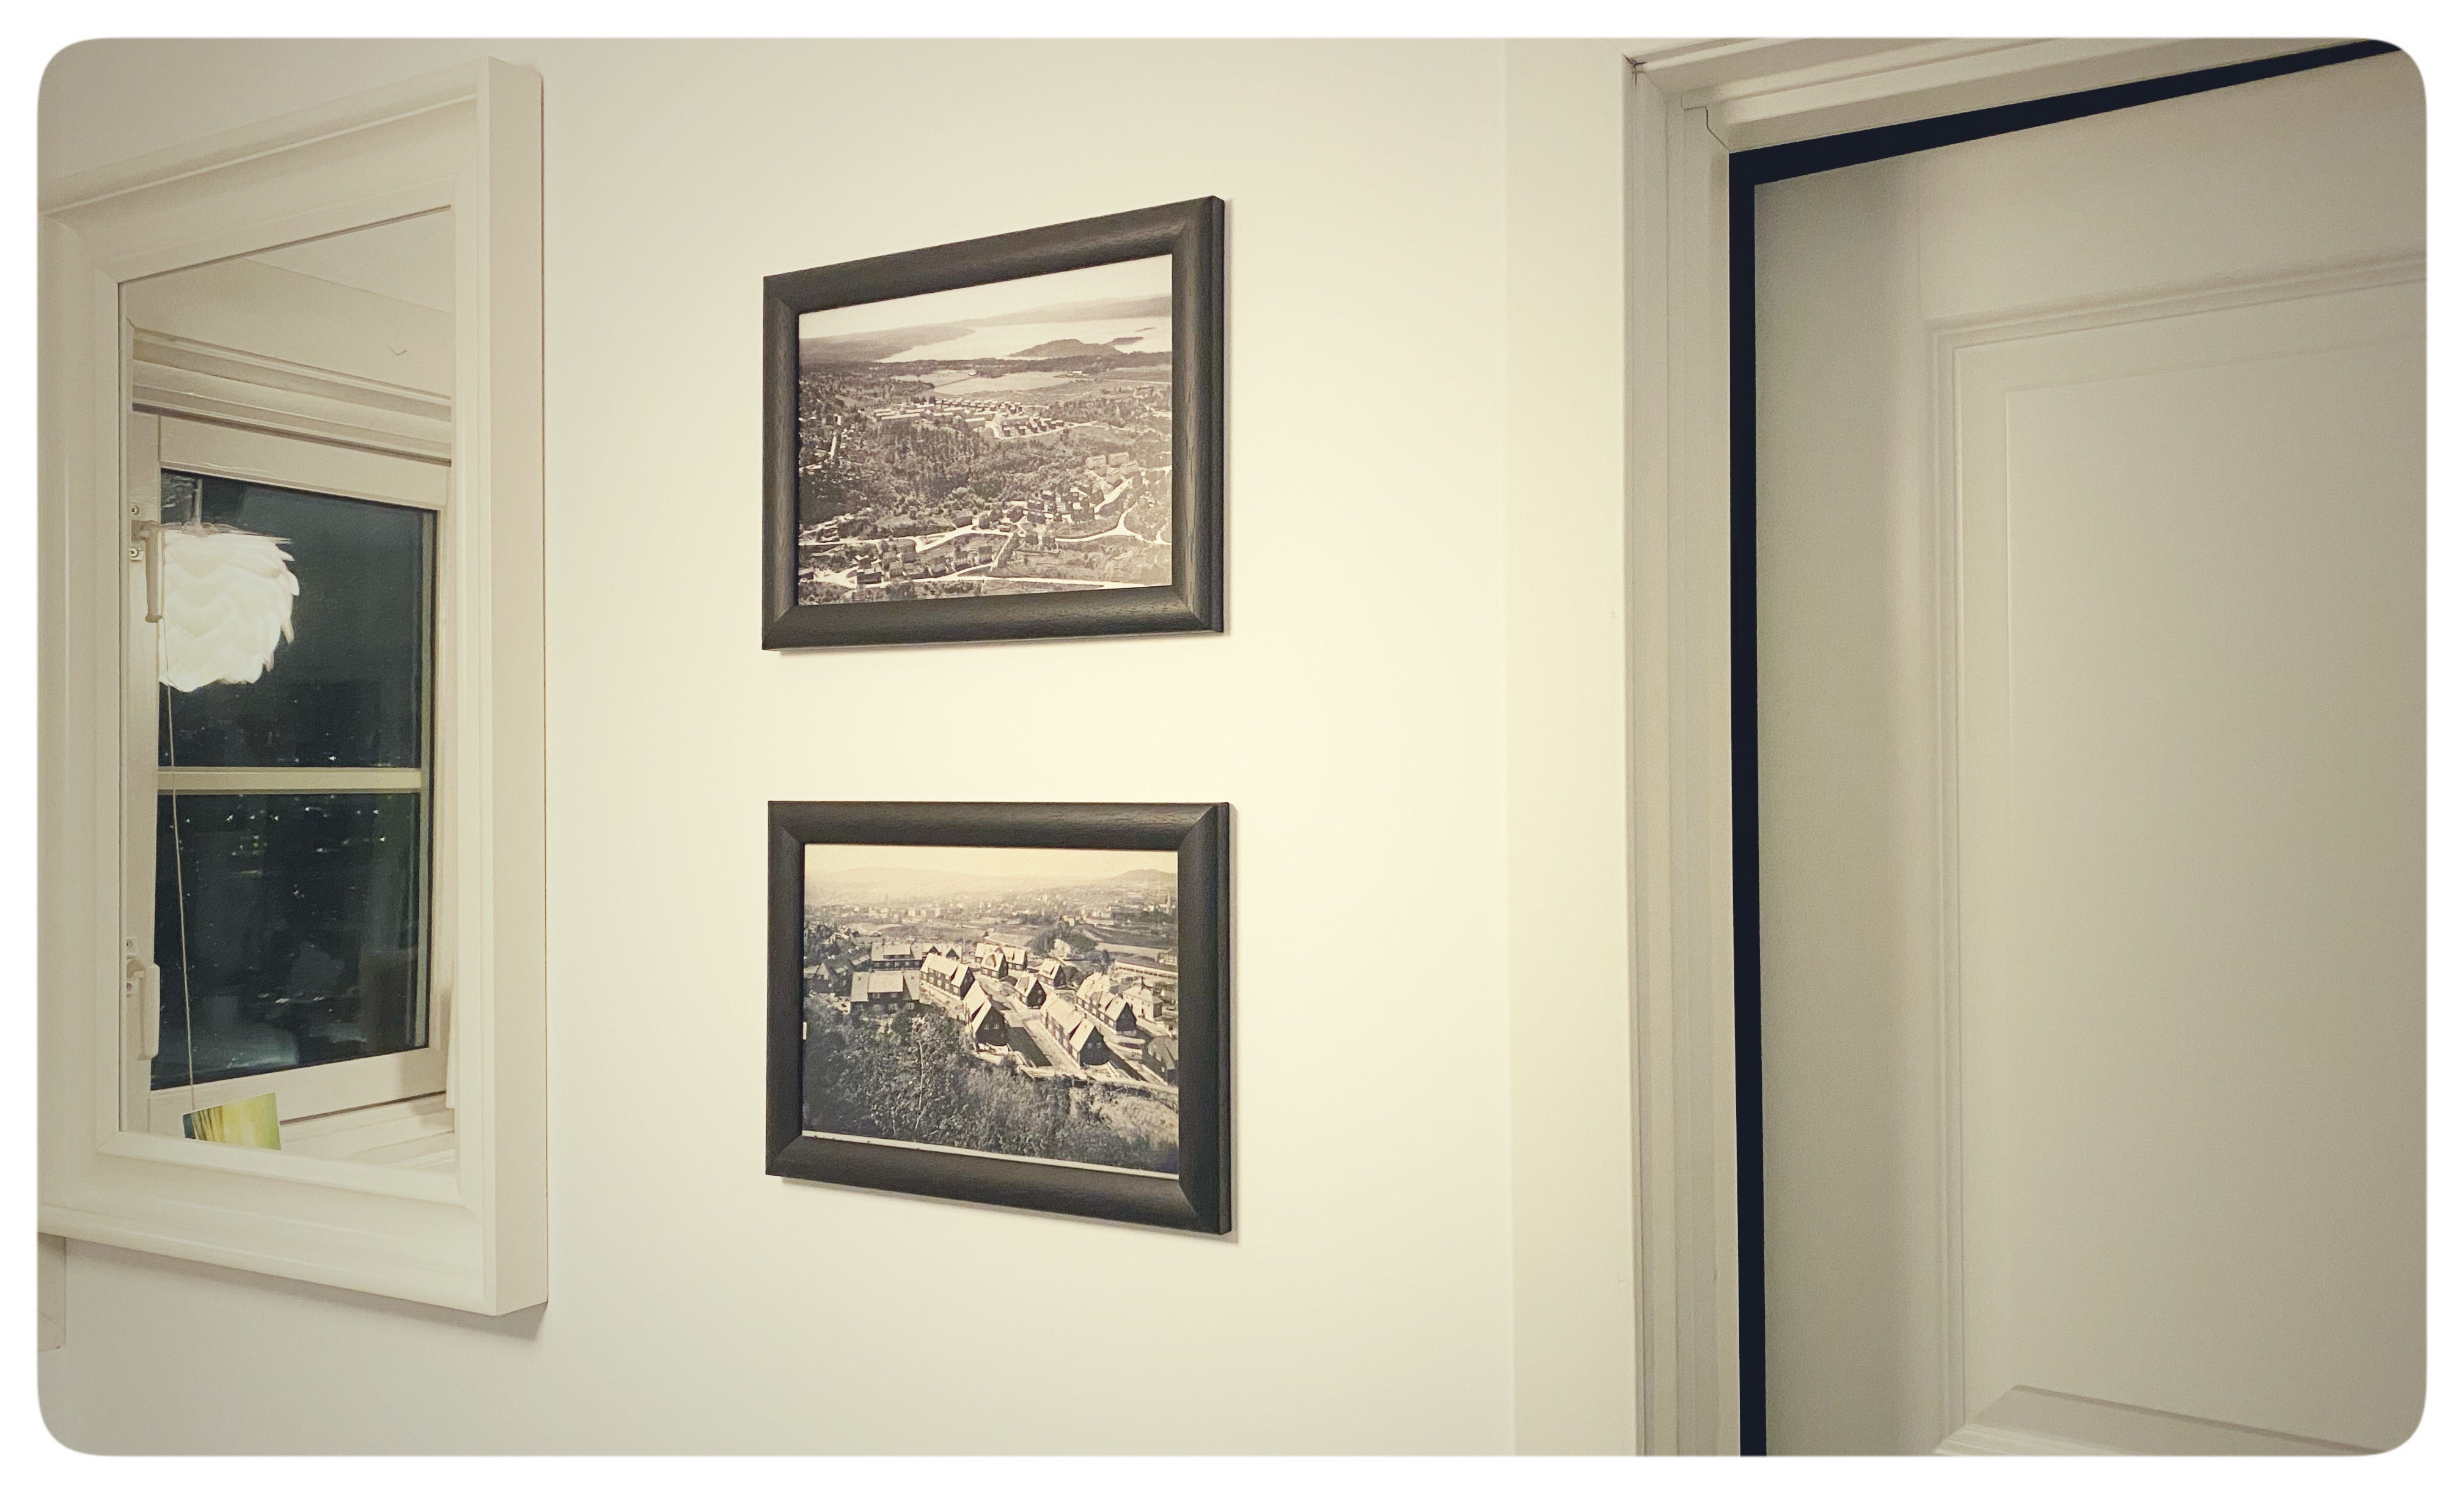 Use Python to Hang Your Picture Frames on the Wall | by Martin